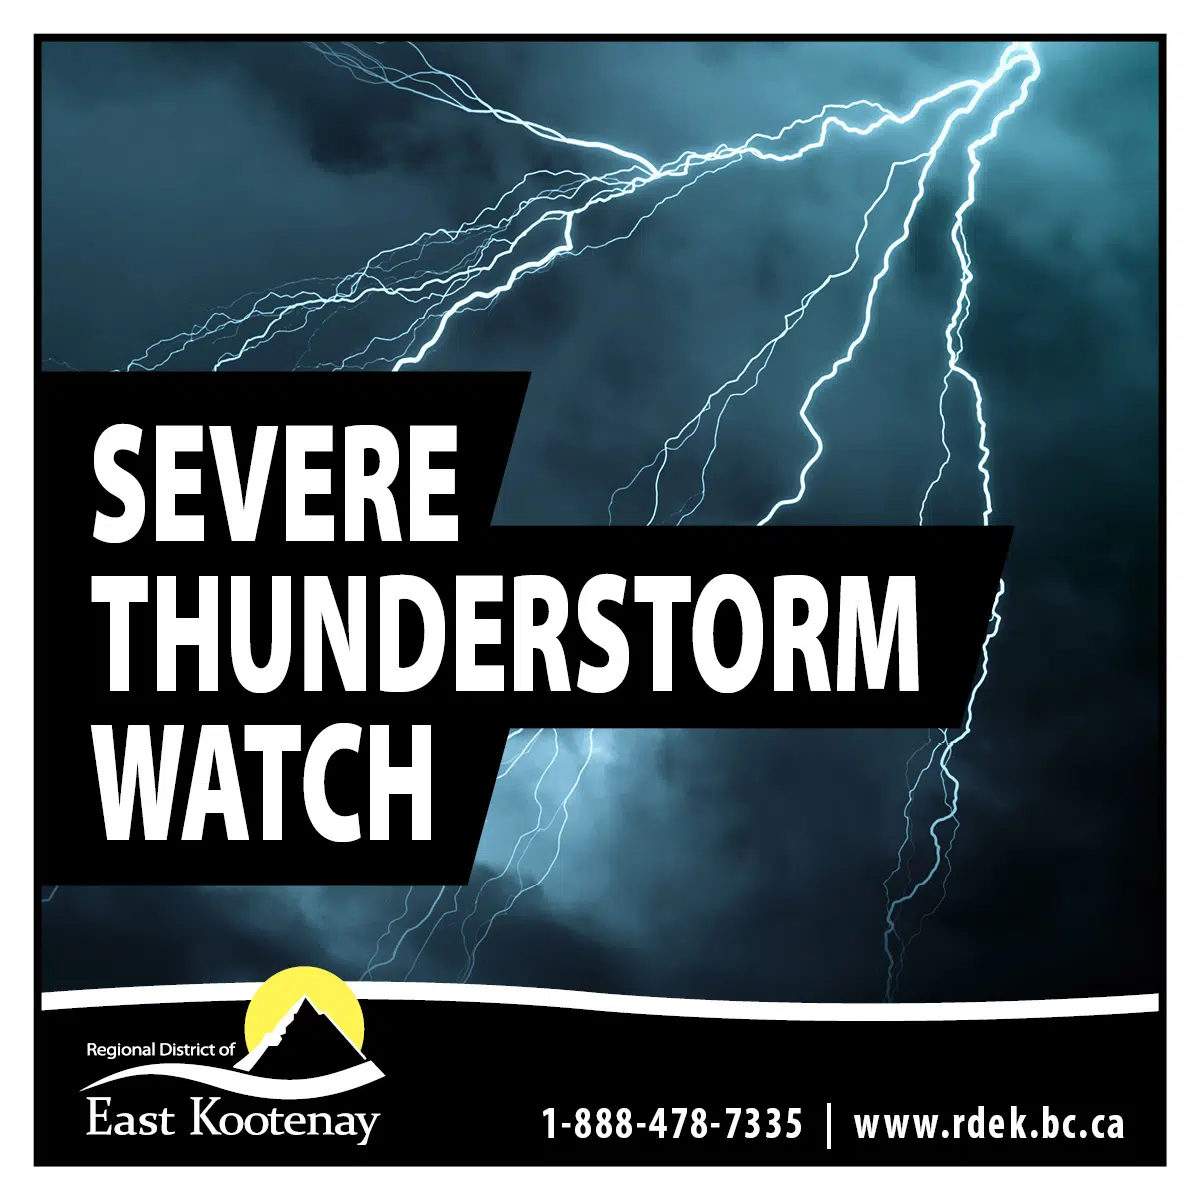 Severe Thunderstorm Watch Severe thunderstorm watch continues